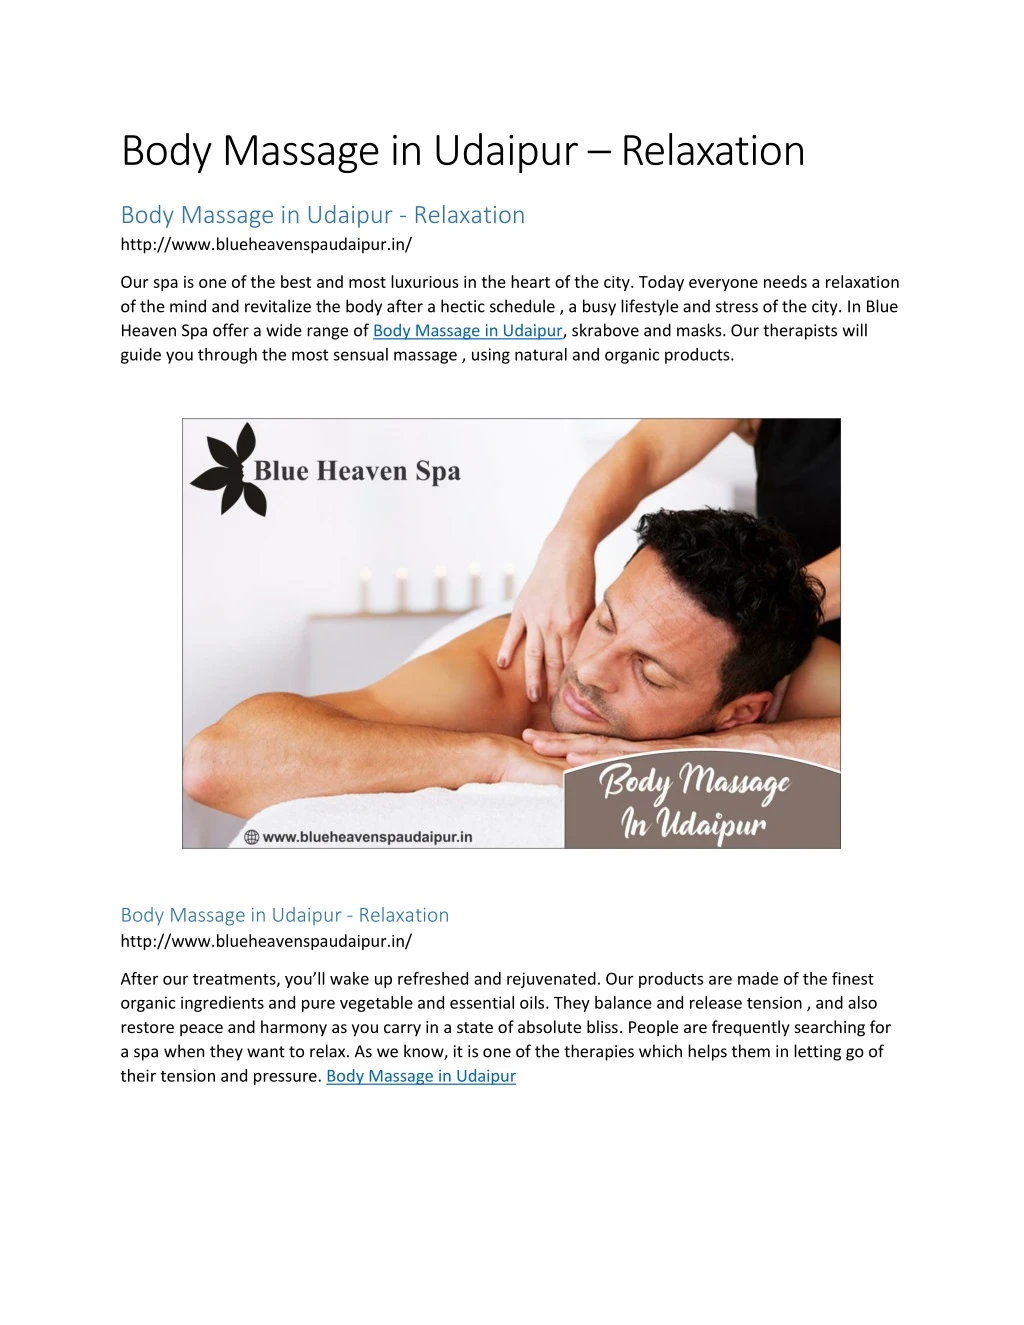 body massage in udaipur relaxation